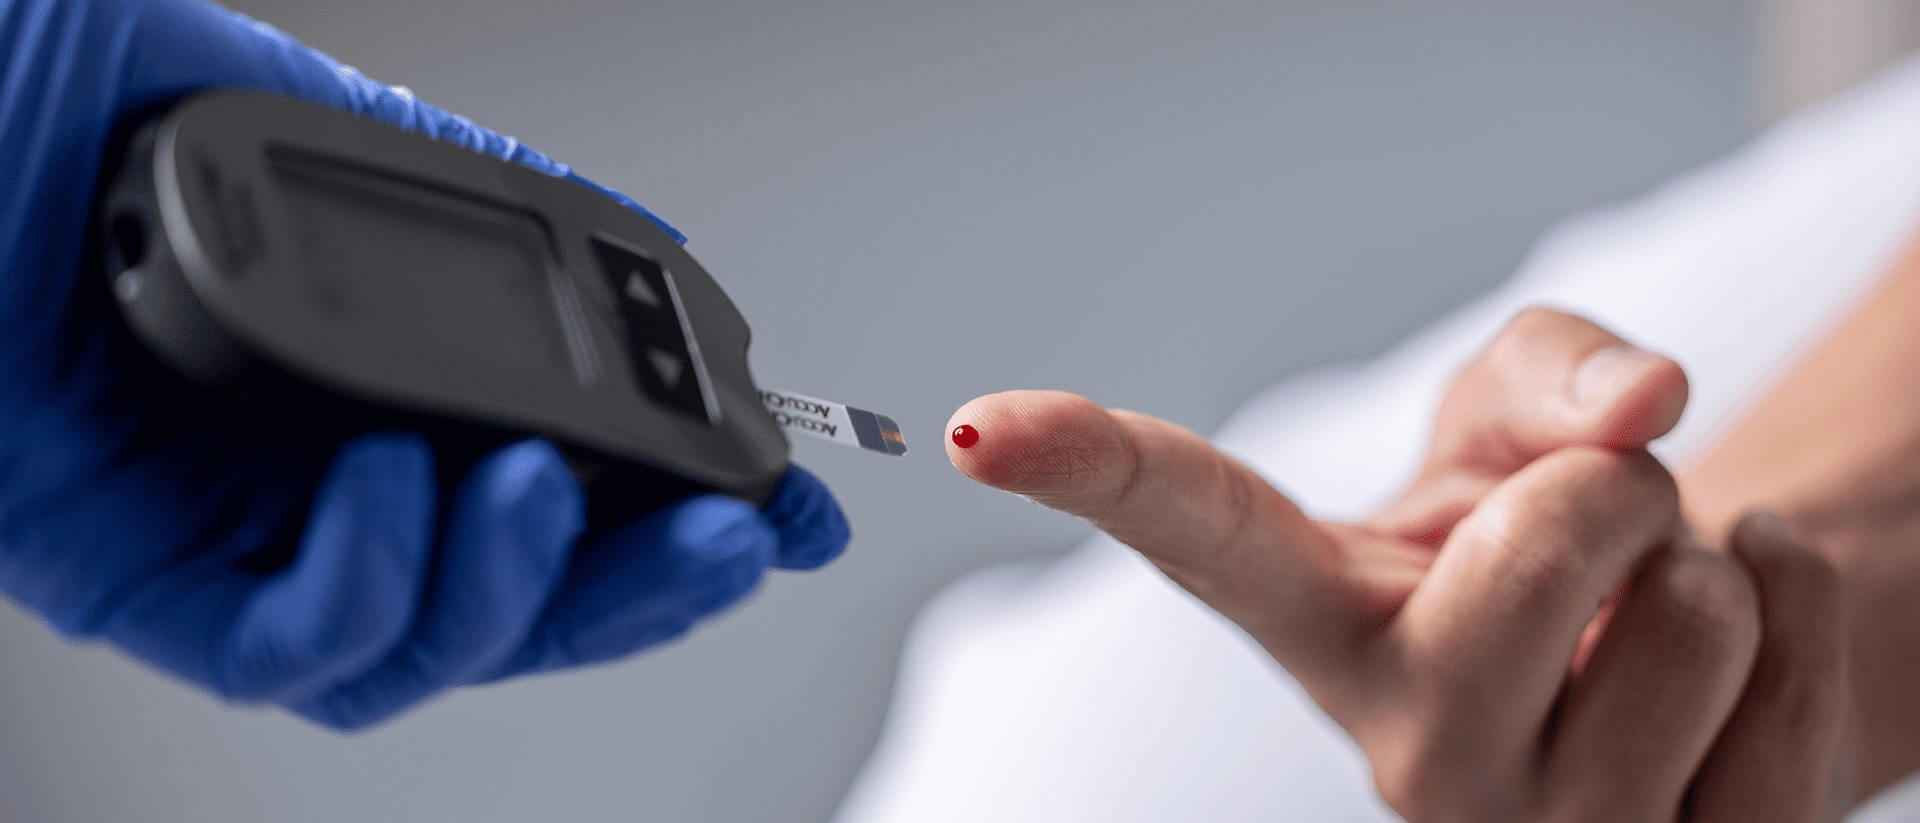 Testing a drop of blood on the patient's fingertip